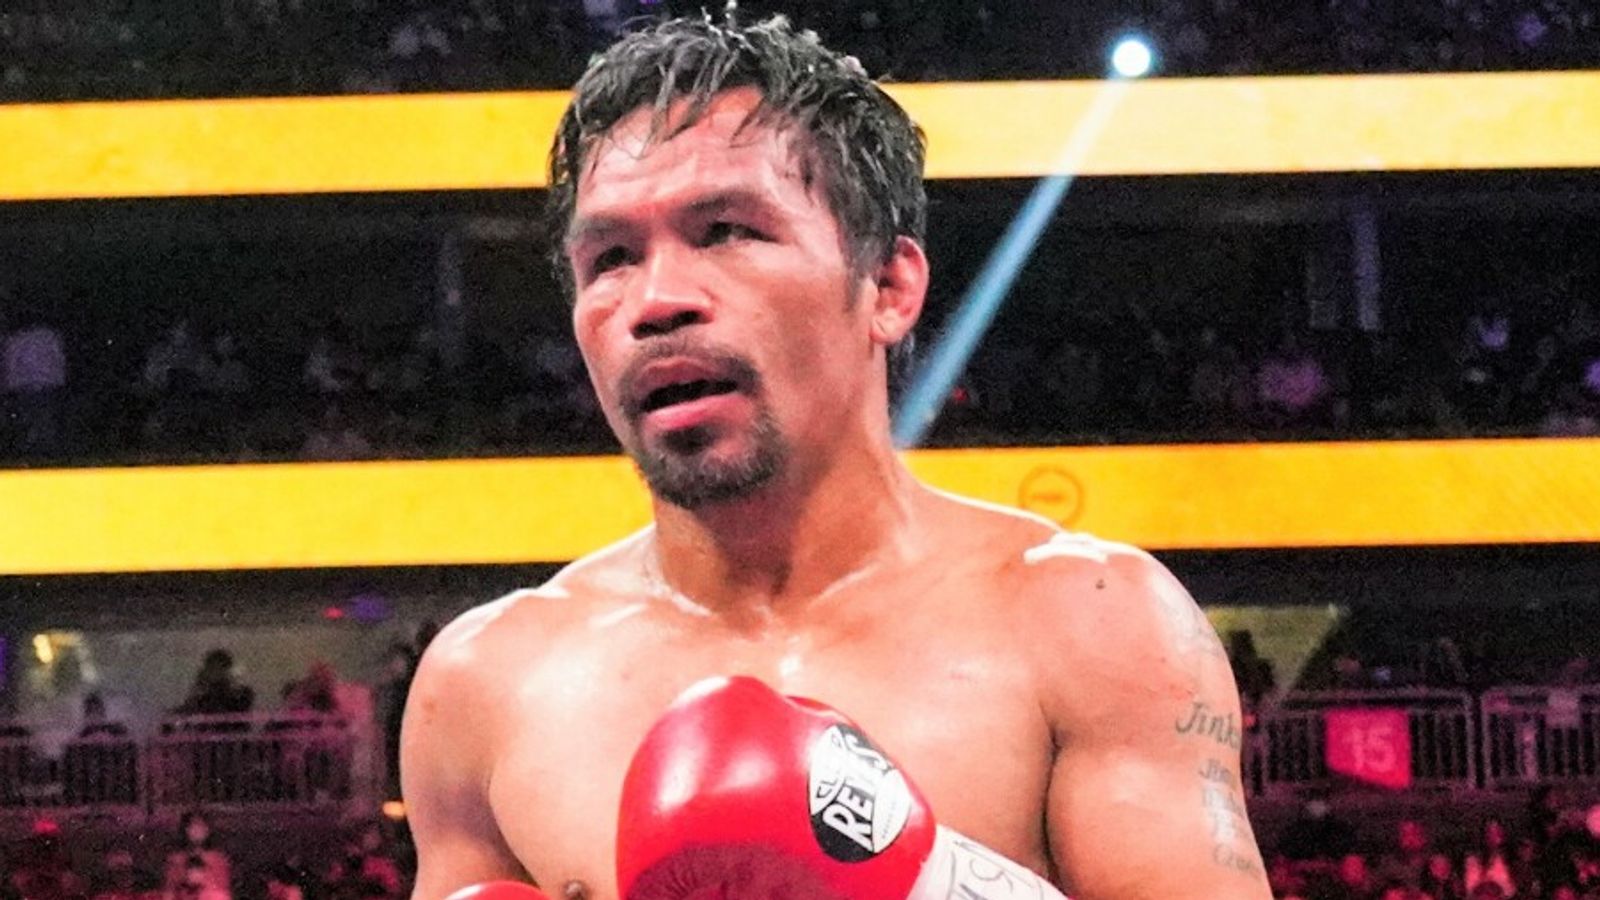 Manny Pacquiao set to make surprise return in WBC welterweight title fight against Mario Barrios | Boxing News